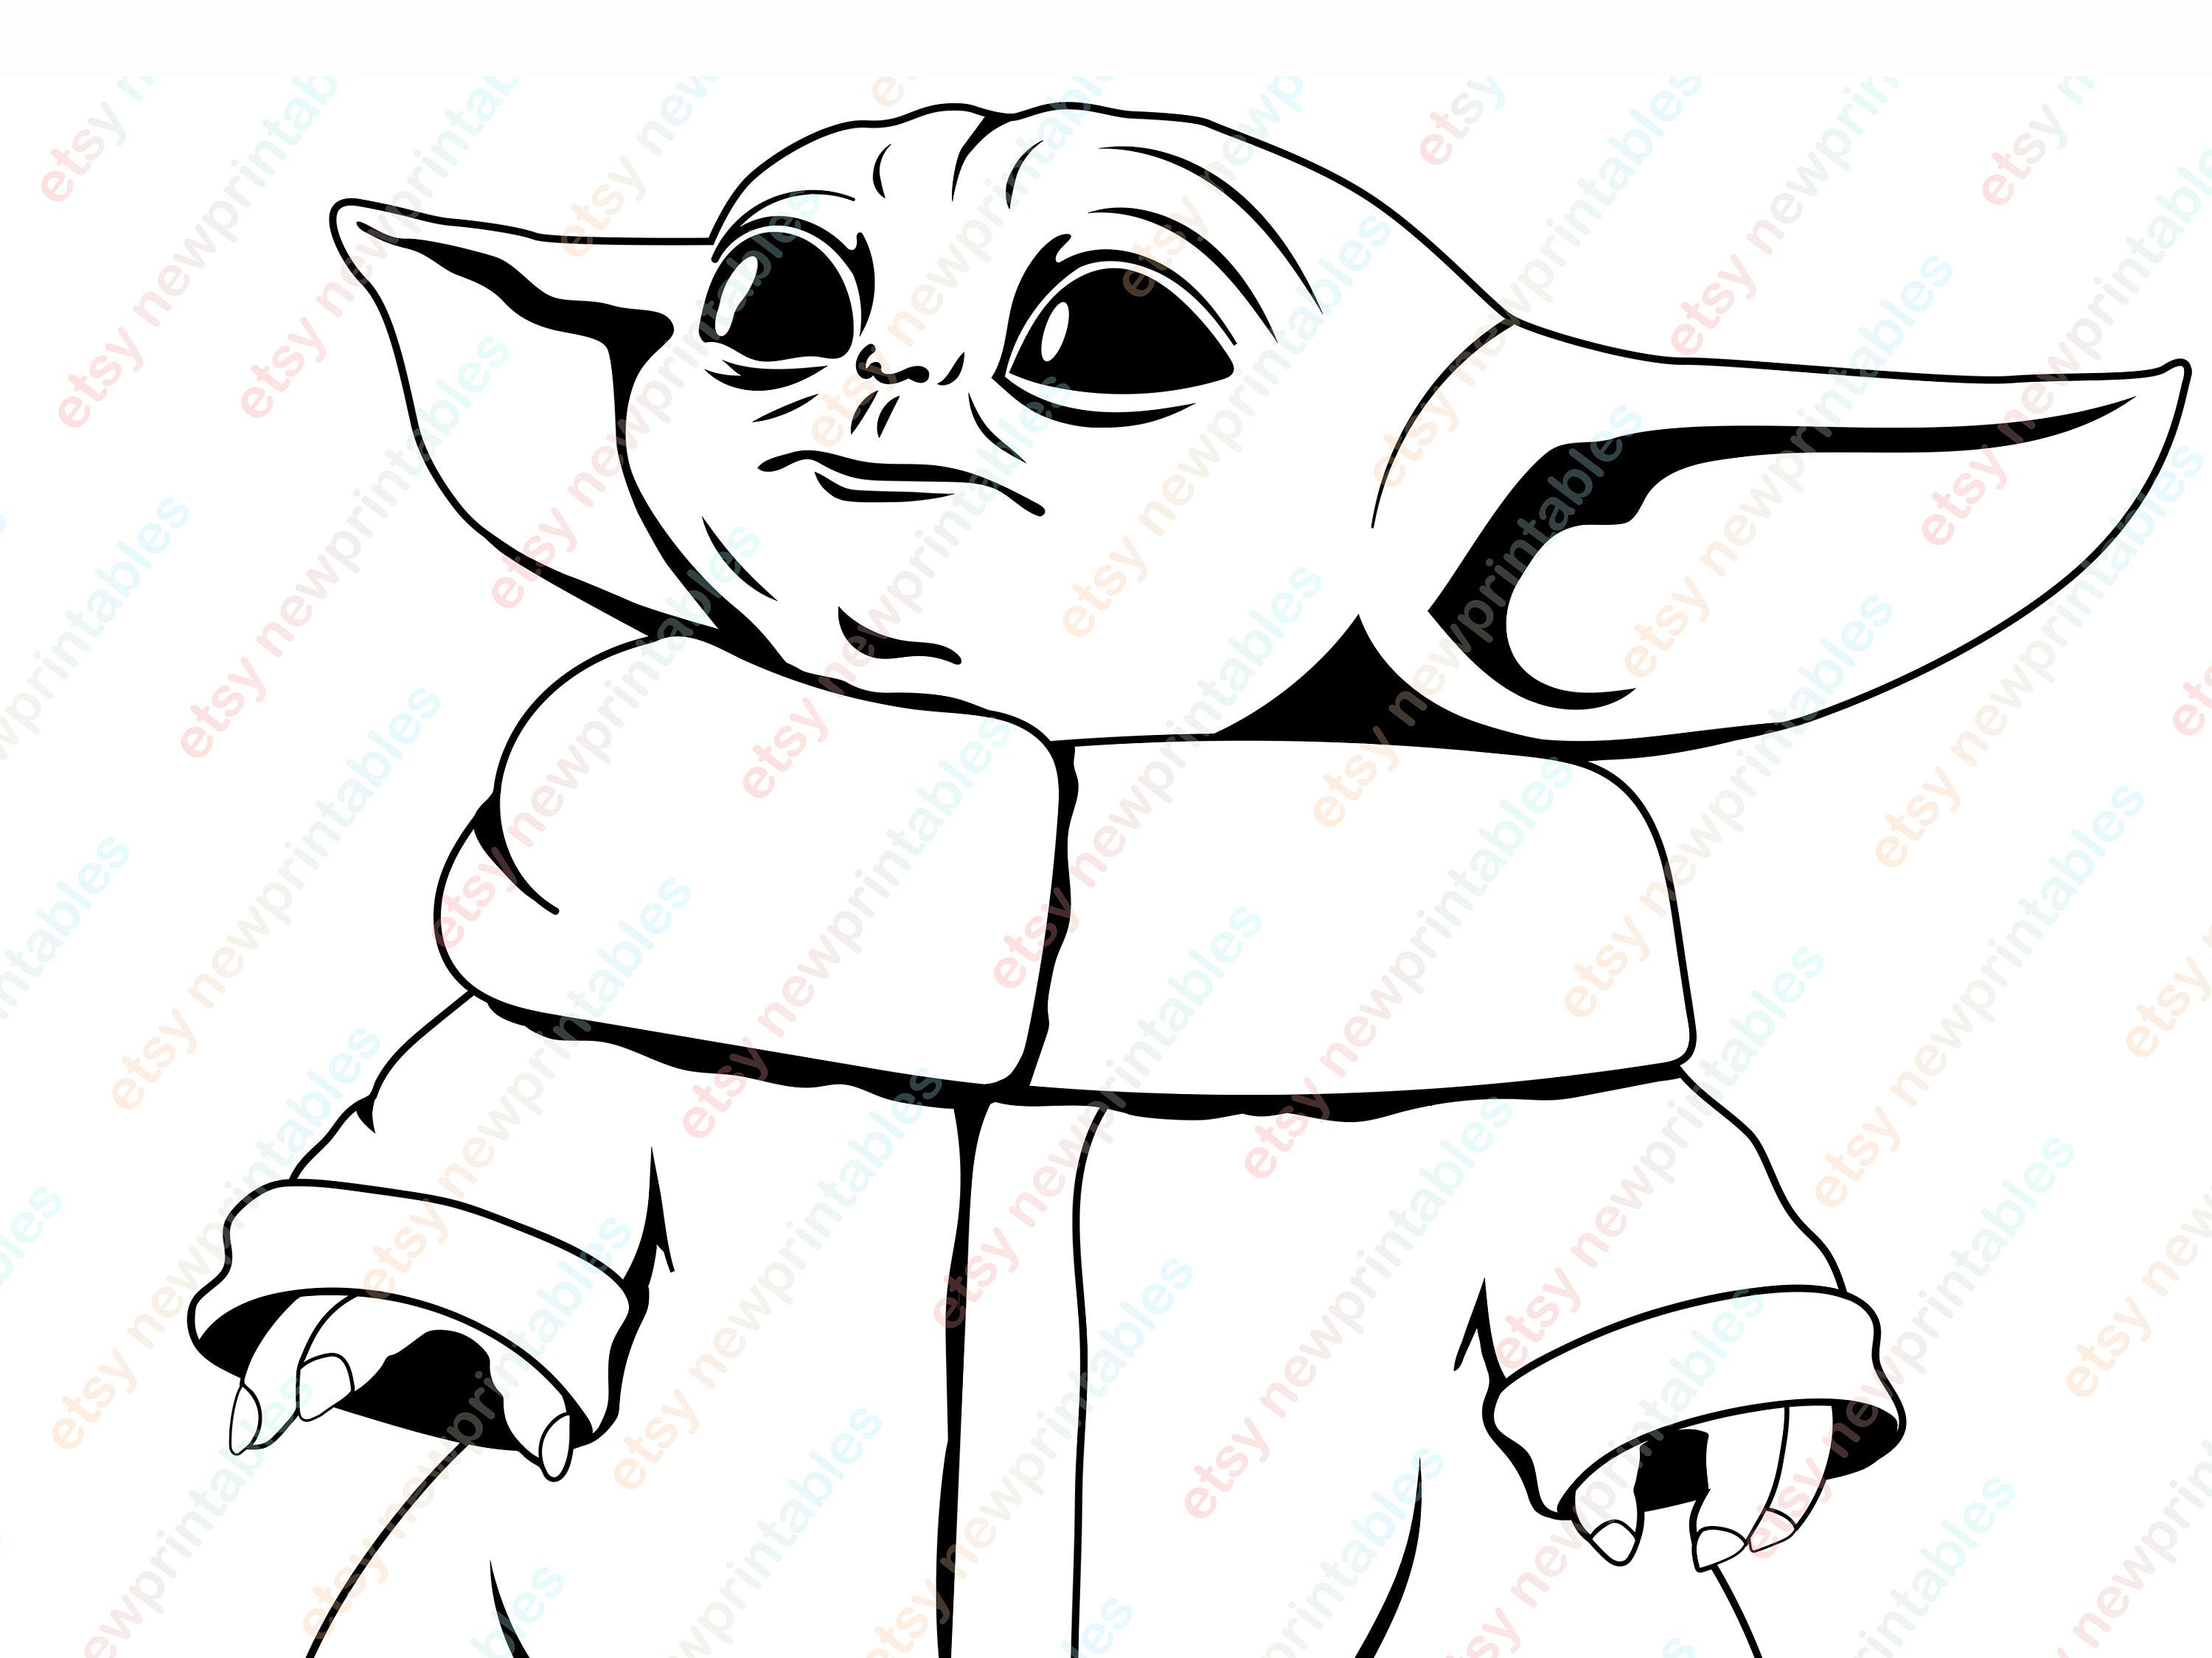 boggieboardcottage: Baby Yoda Coloring Pages Free